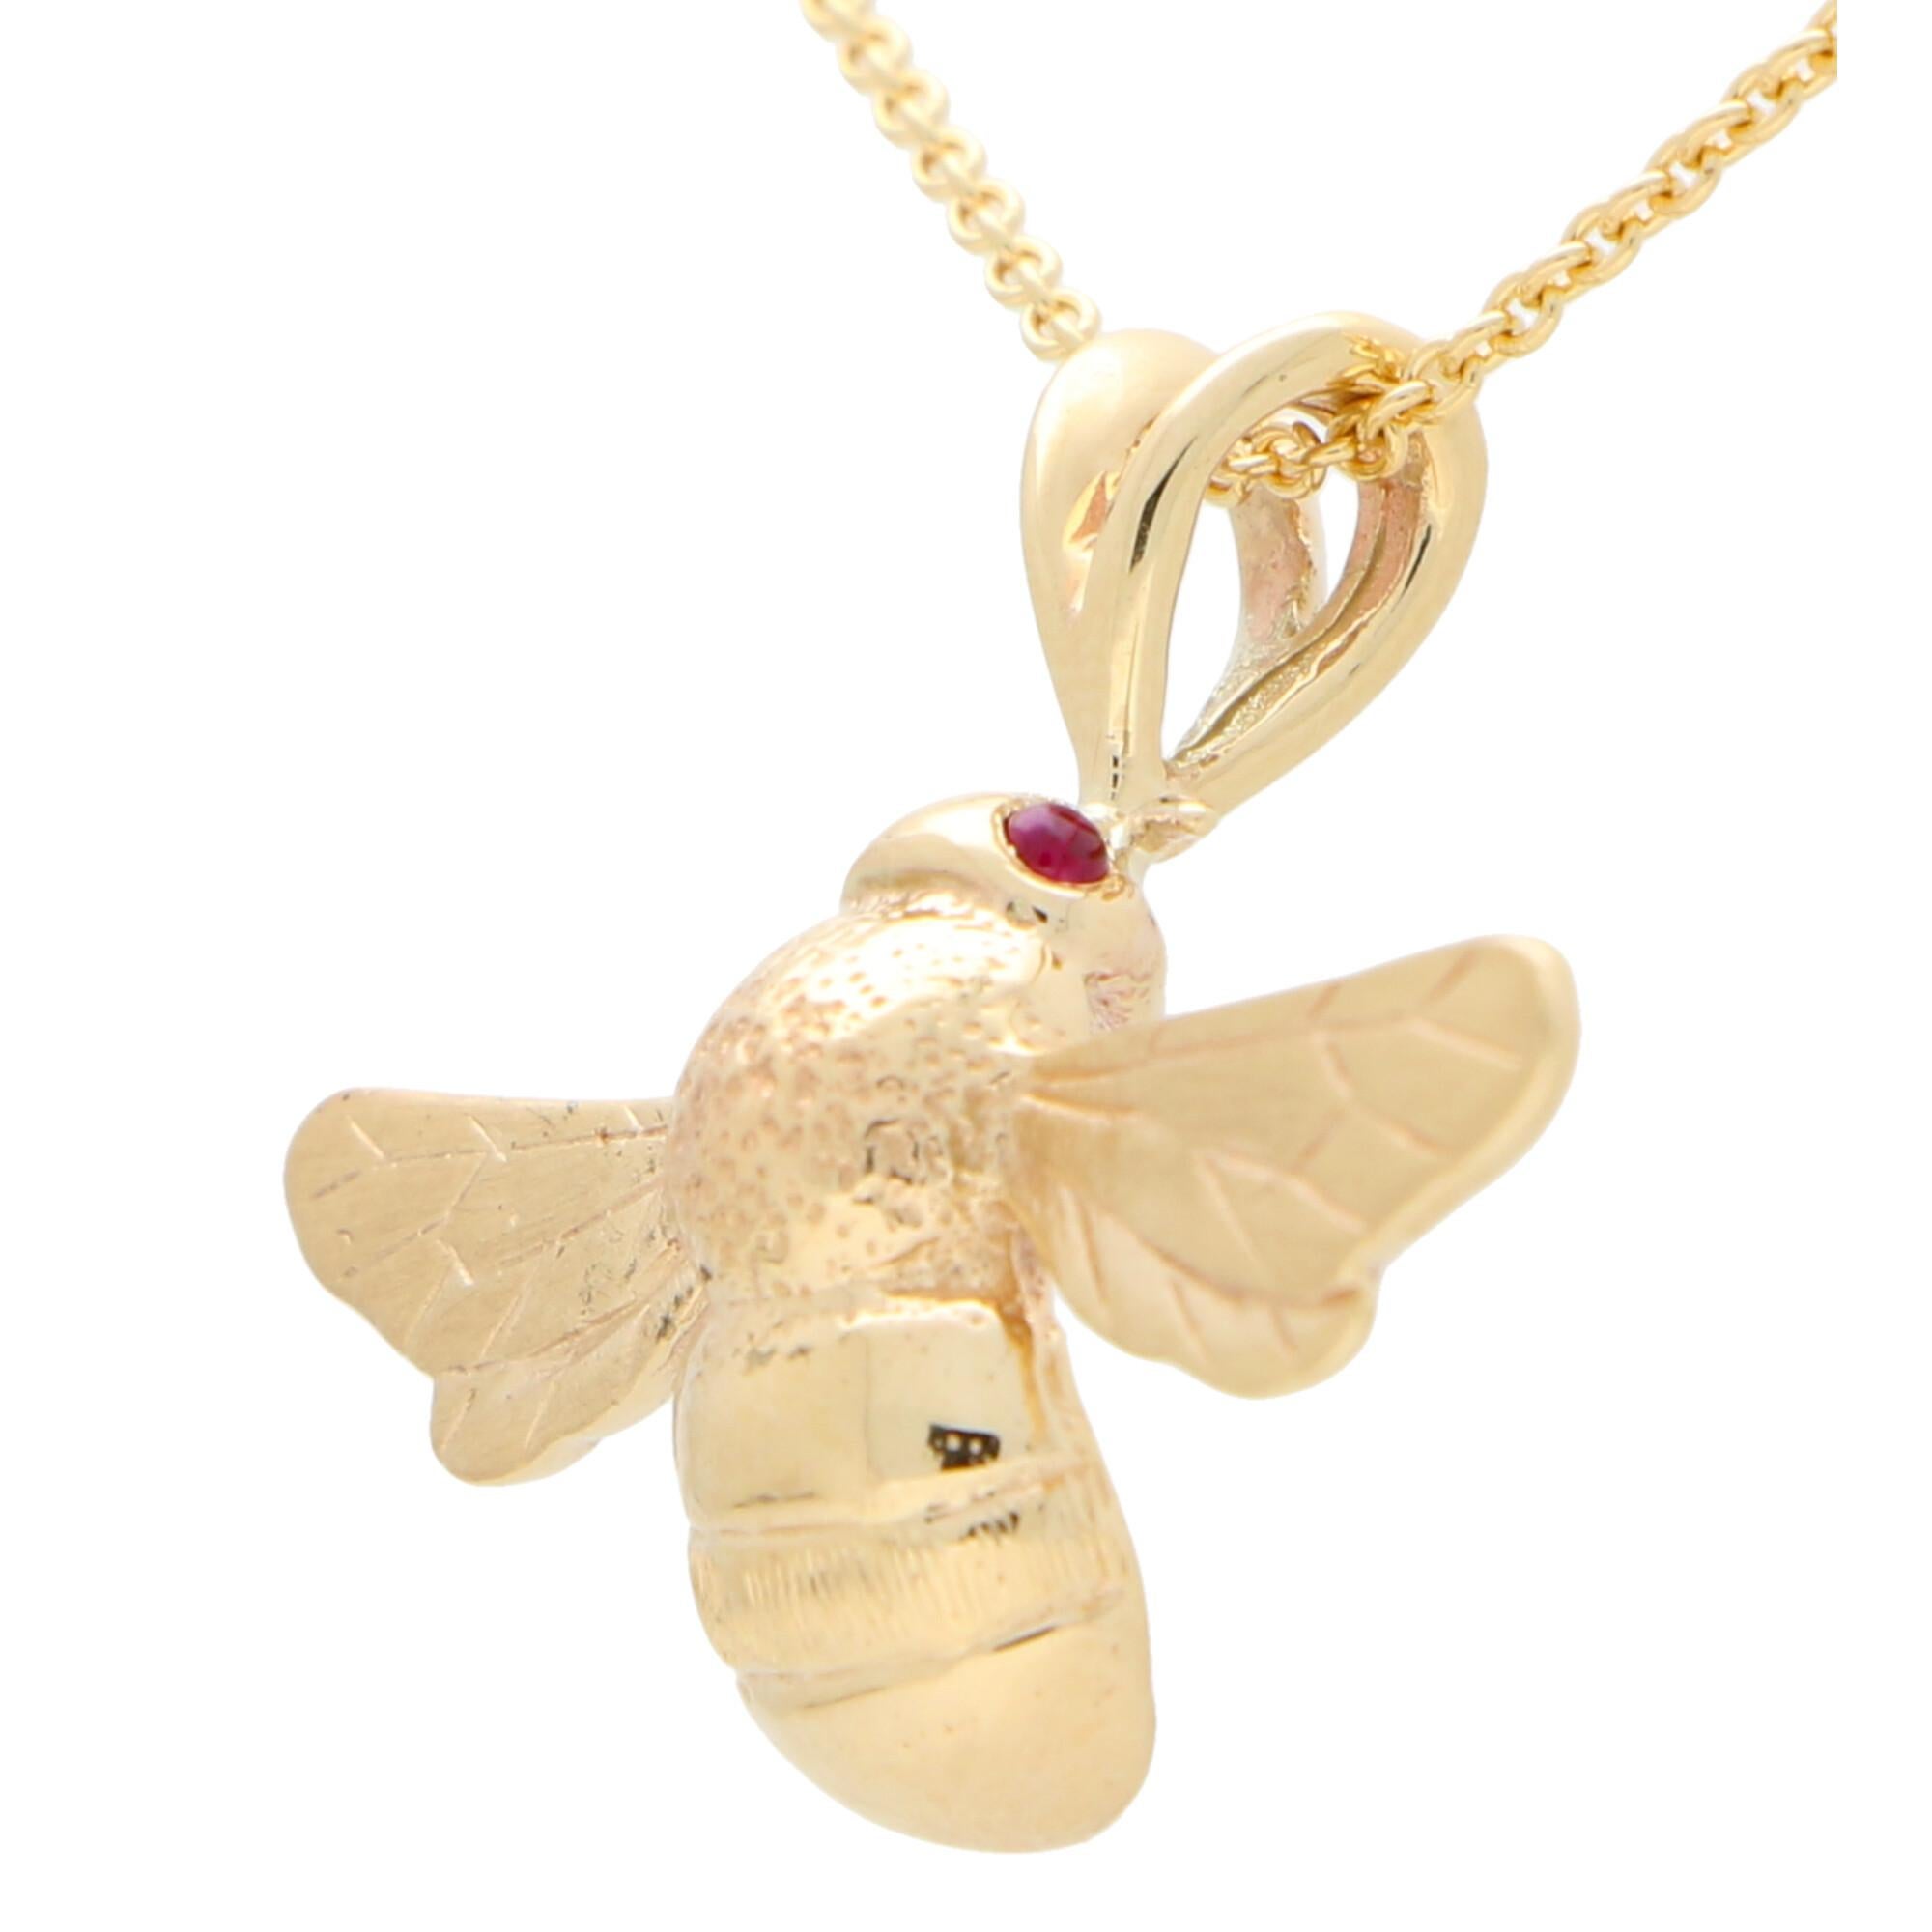 A beautiful cabochon ruby eyed bee pendant necklace set is 9k yellow gold.

The pendant depicts a lovely naturalistic bumble bee with delicate detailing on the wings and body. The bee is set with two vibrant red cabochon ruby eyes which add a